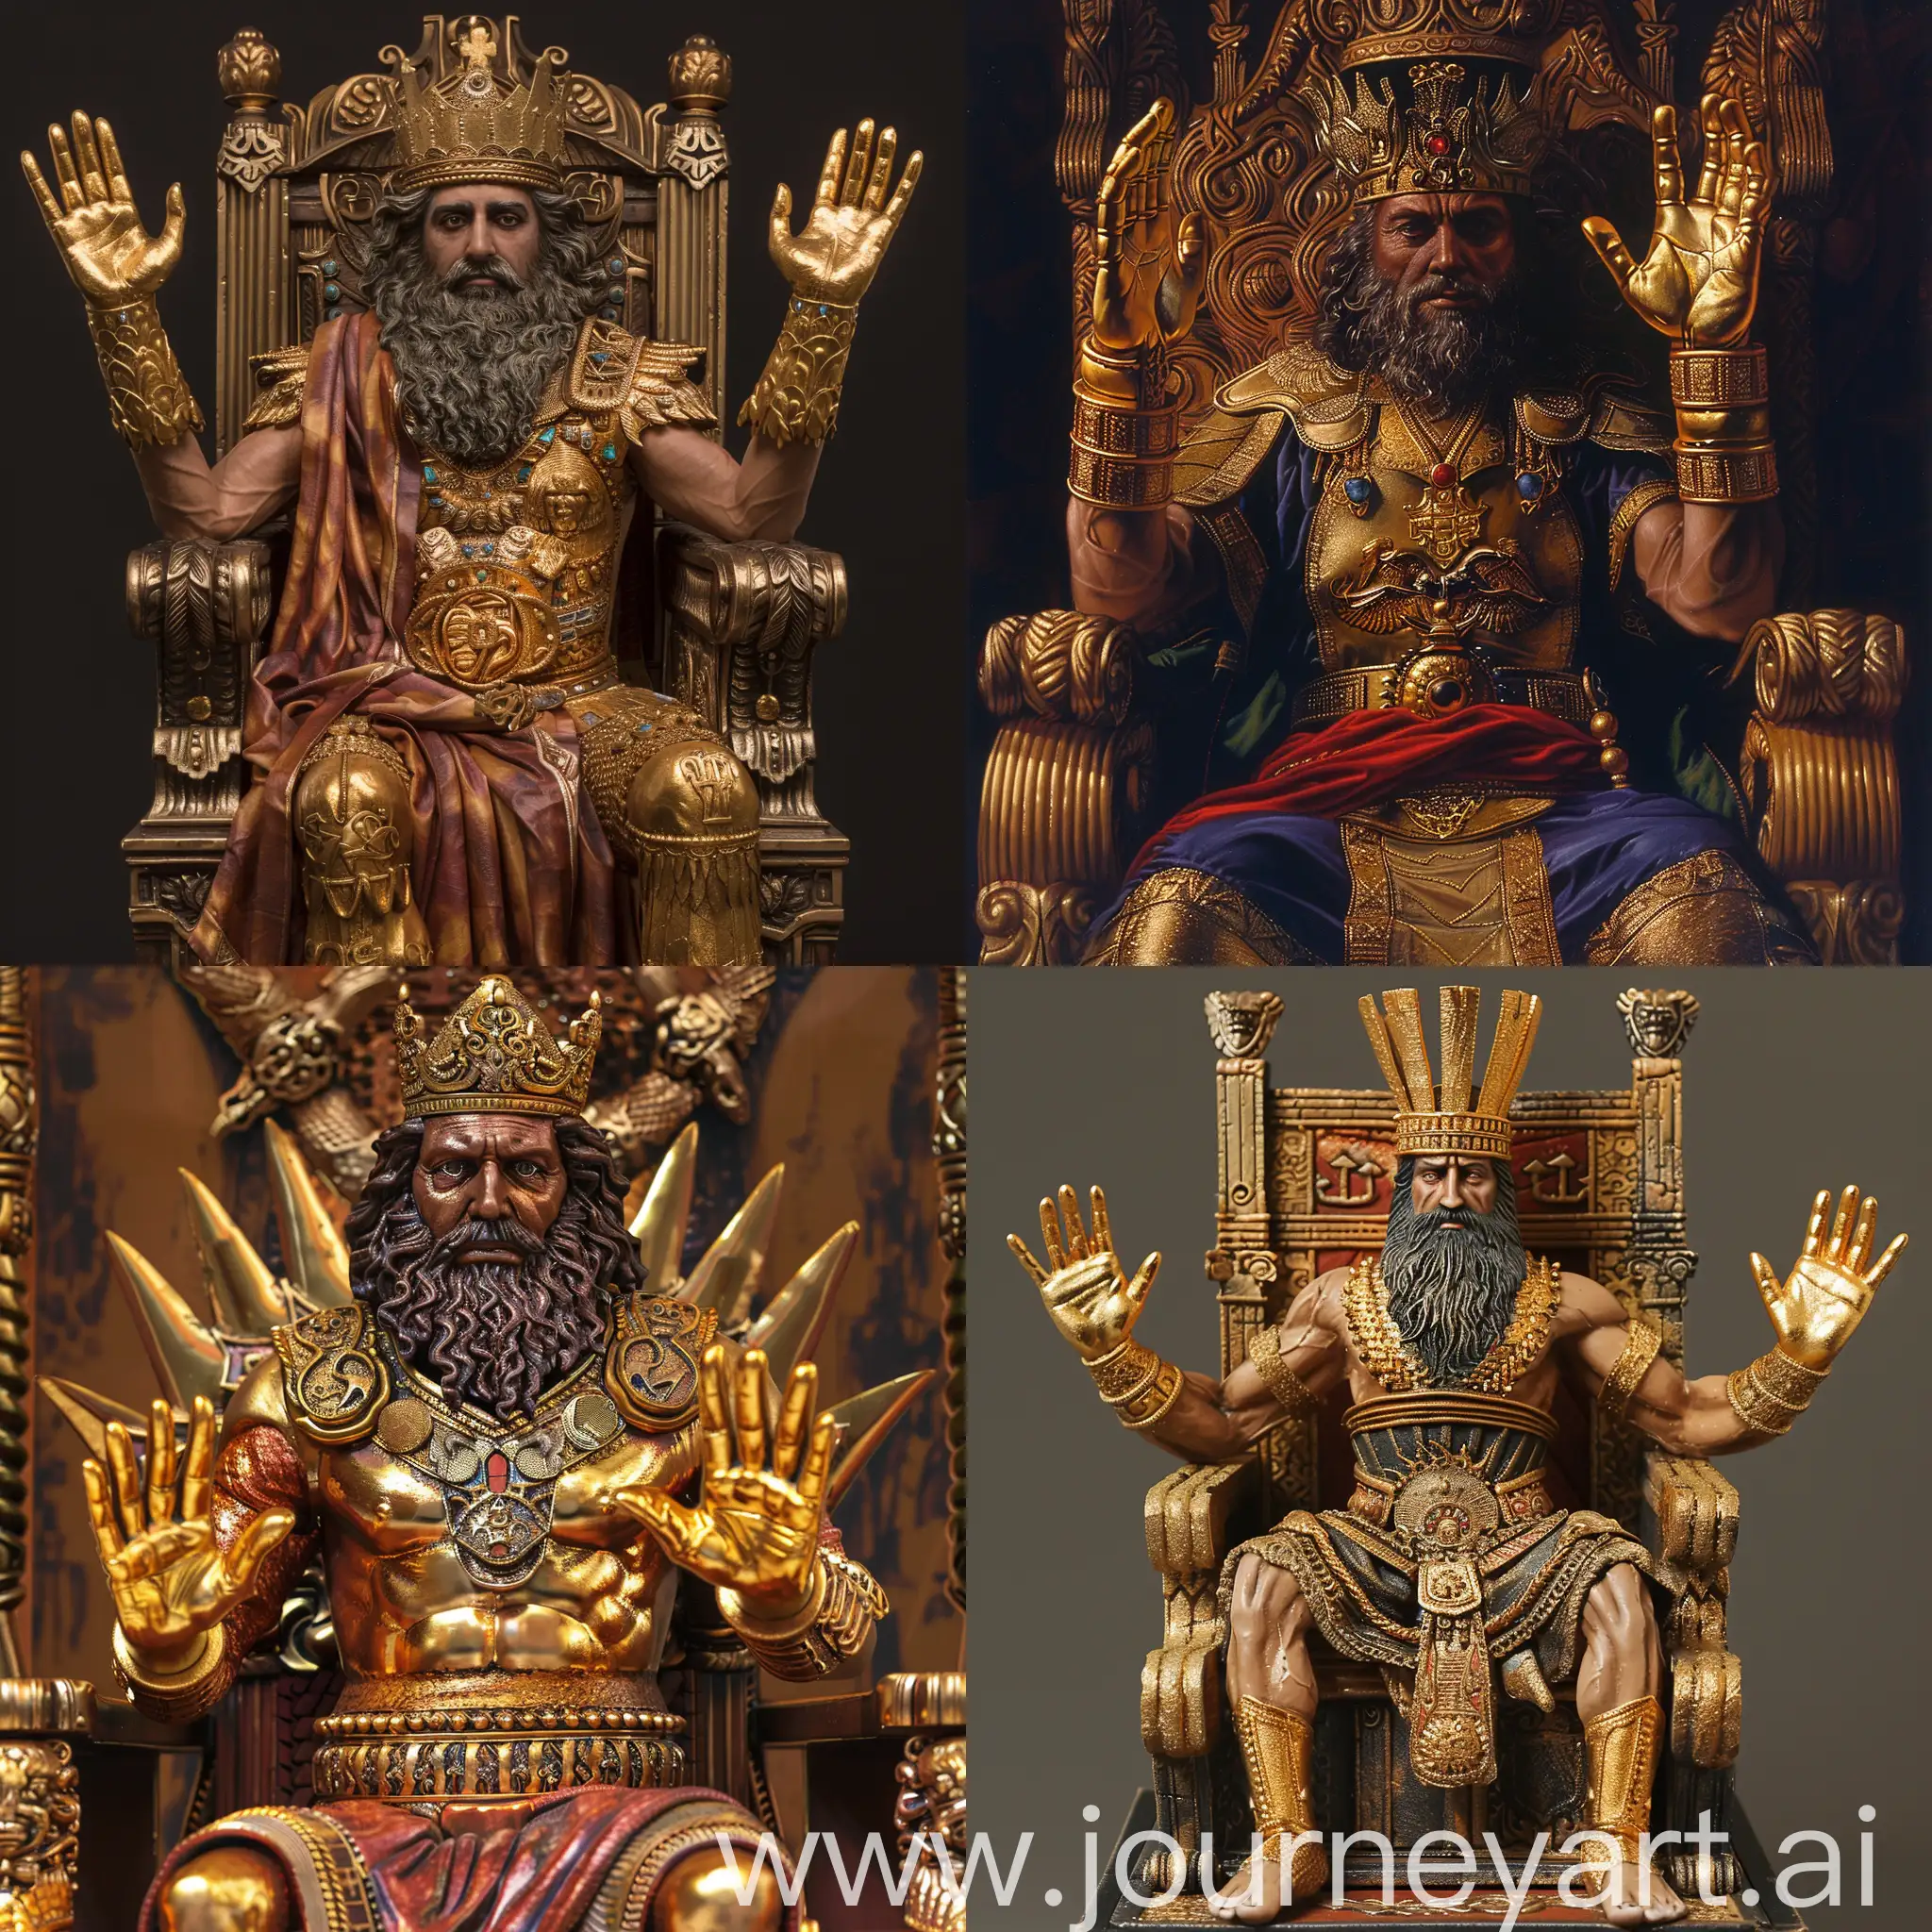 King-Midas-Seated-on-the-Throne-with-Gilded-Hands